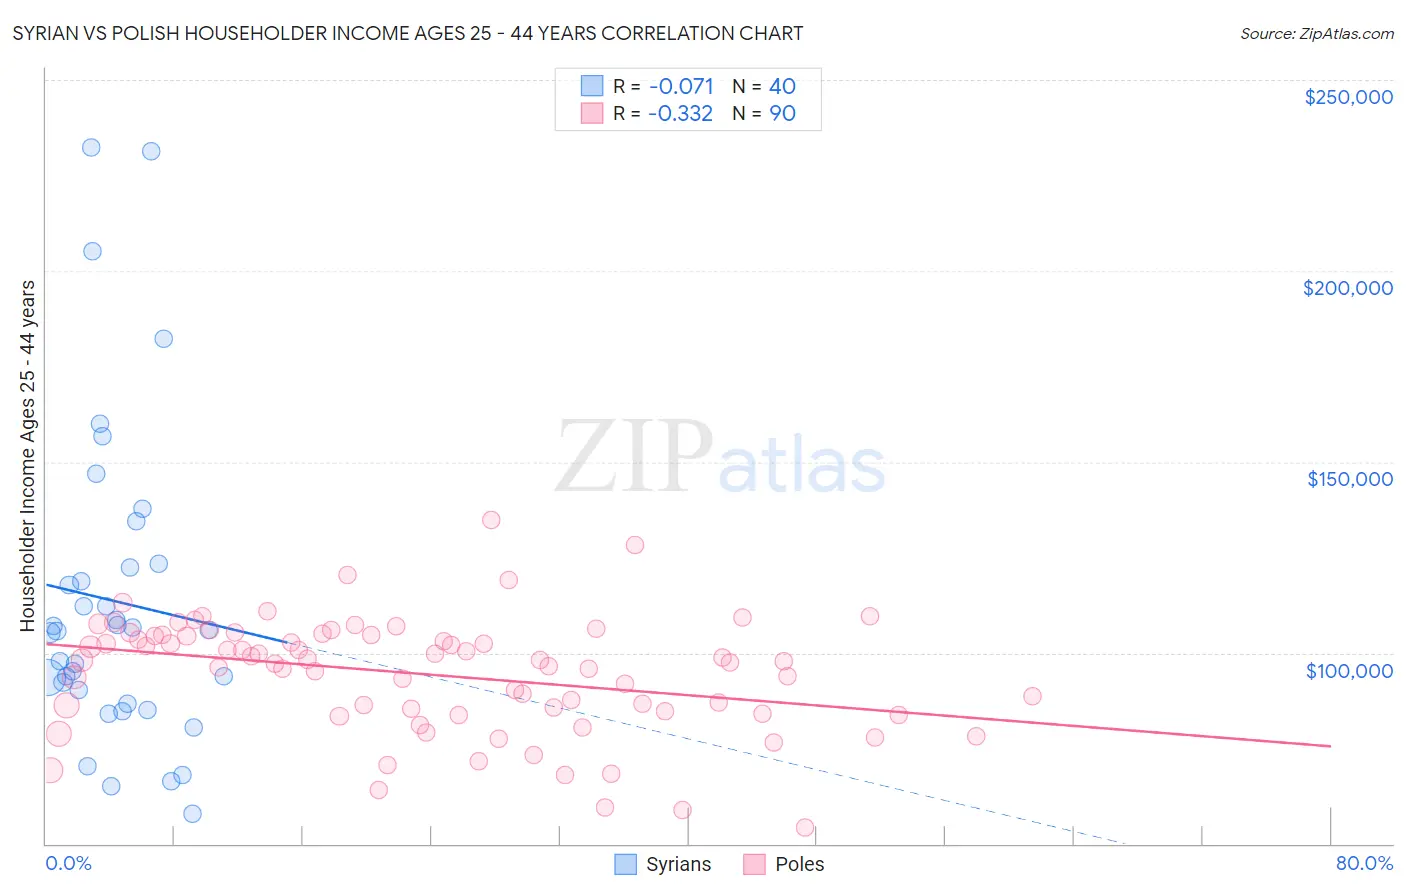 Syrian vs Polish Householder Income Ages 25 - 44 years